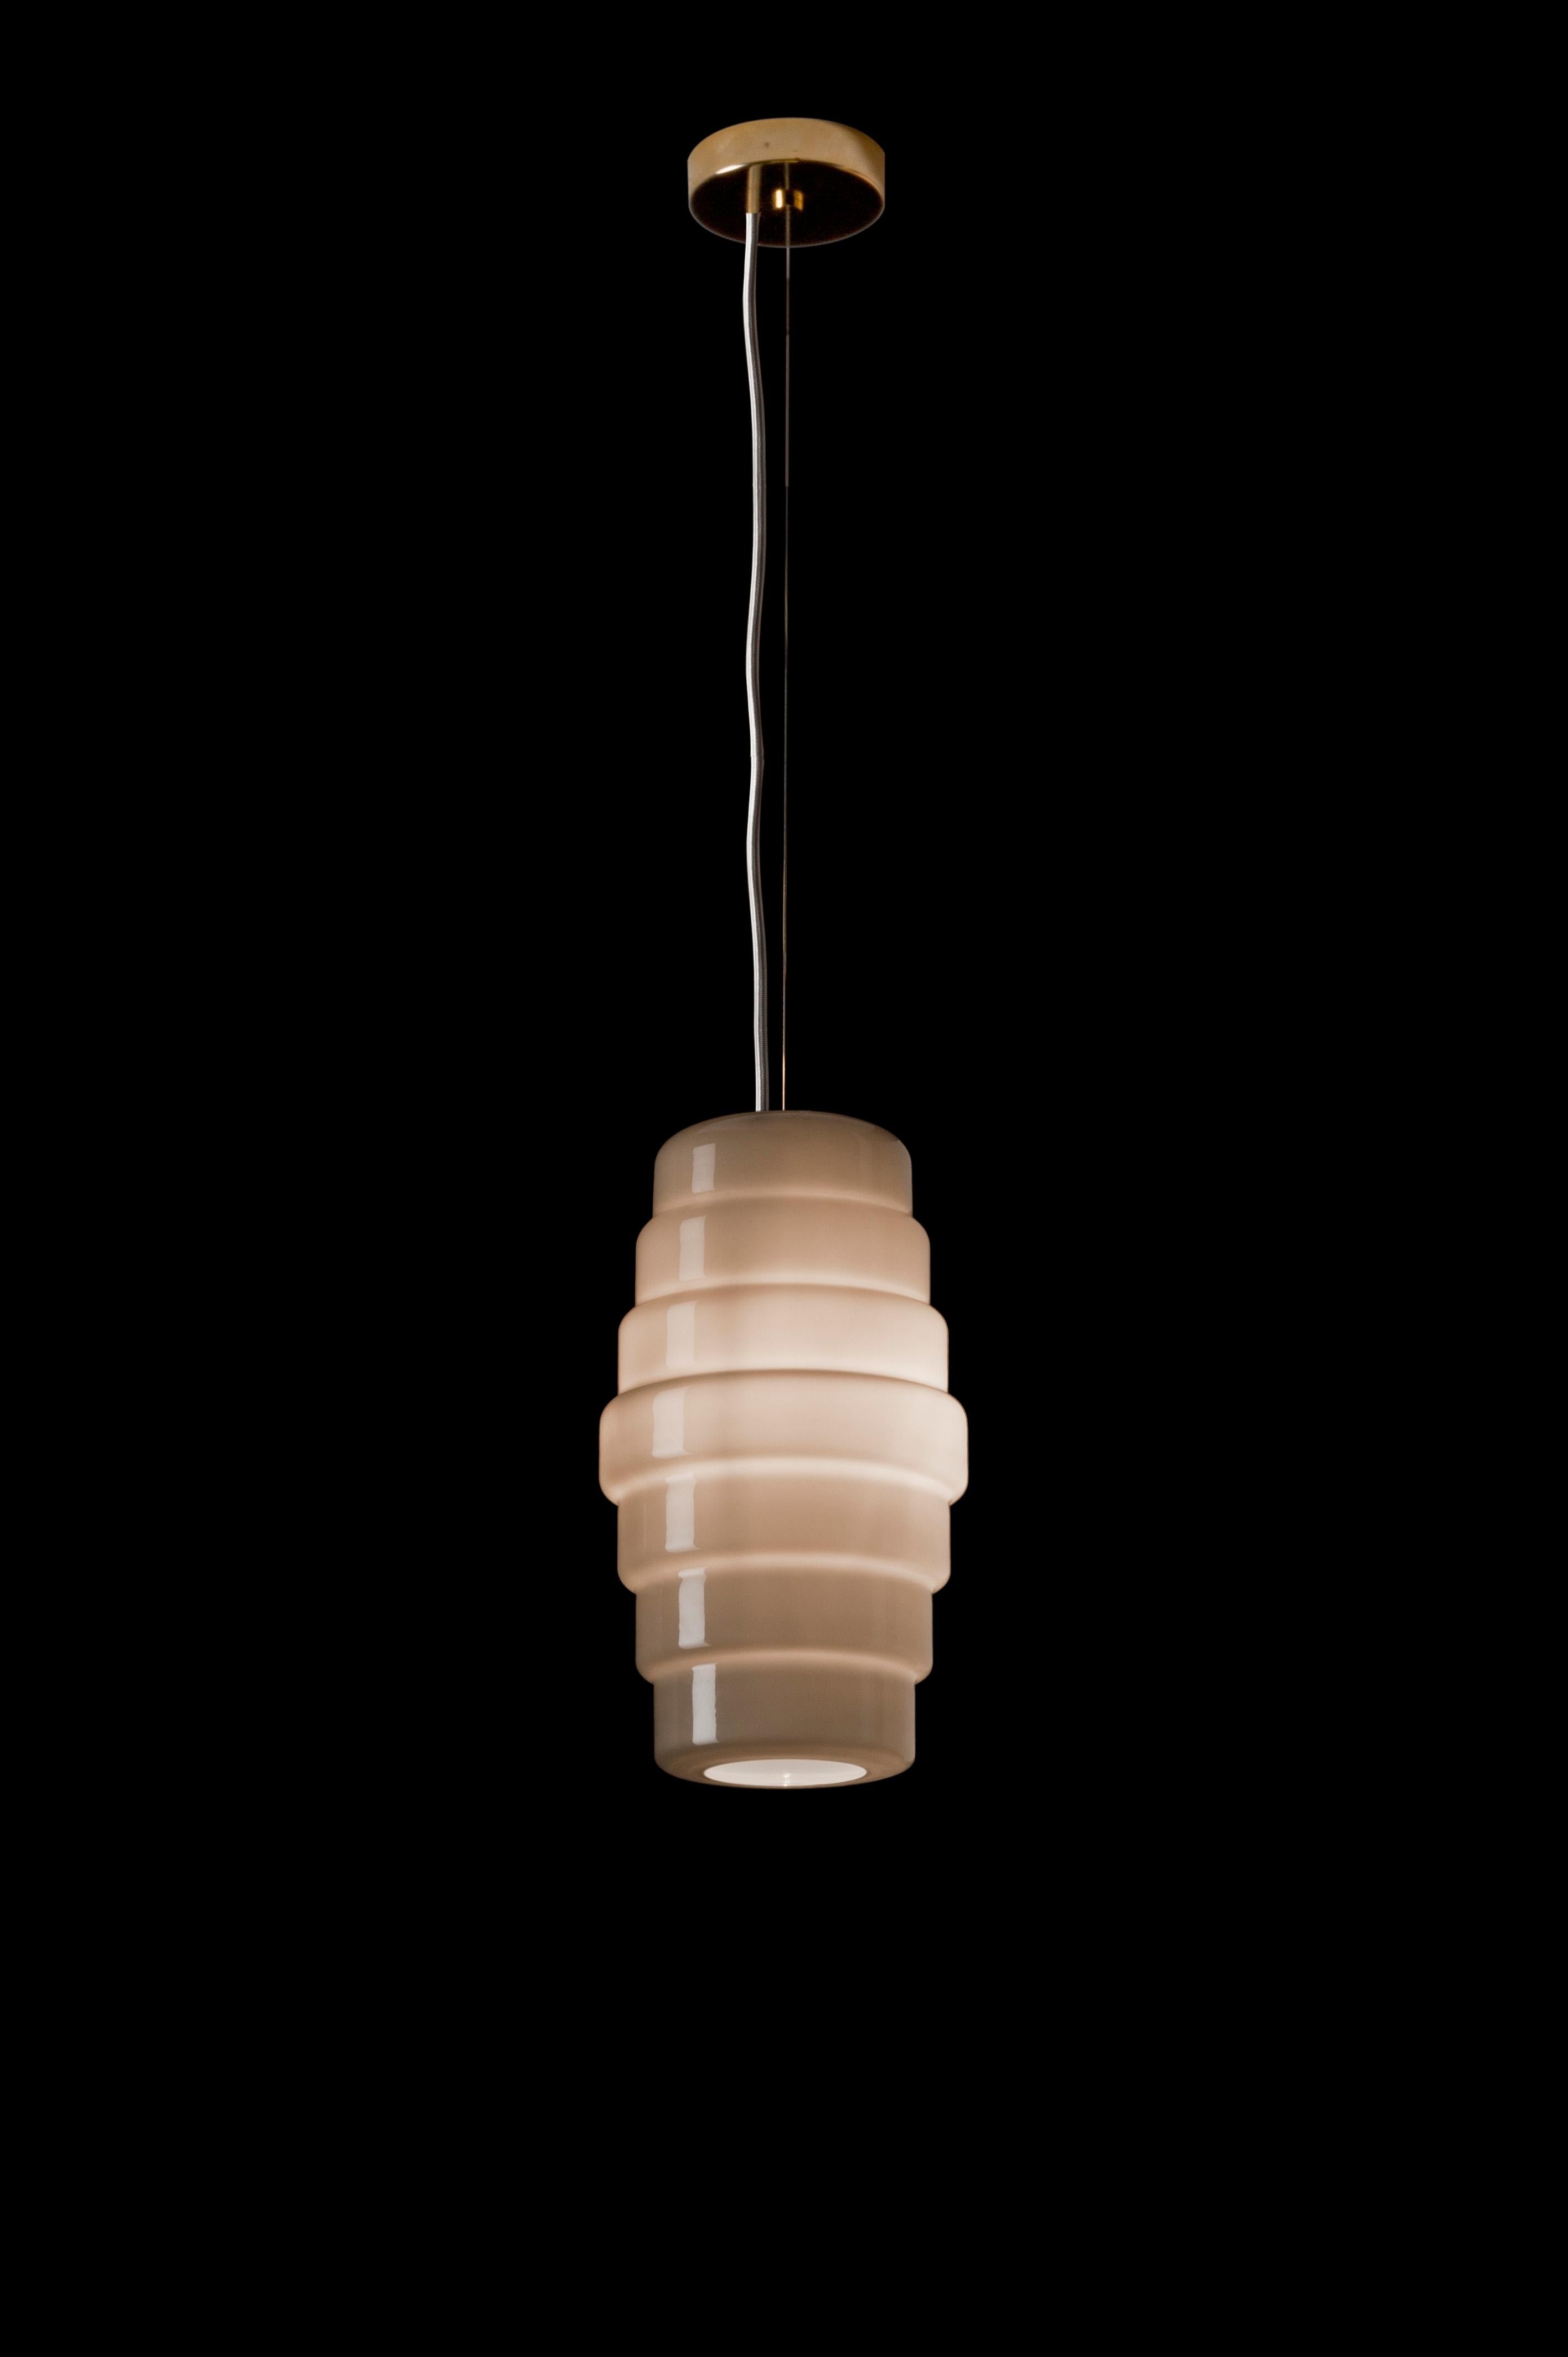 Zoe pendant lamp, designed by Doriana and Massimiliano Fuksas and manufactured by Venini, features a lantern shape. Available in two different sizes. Indoor use only.

Dimensions: Ø 30 cm, H 52.5 cm.